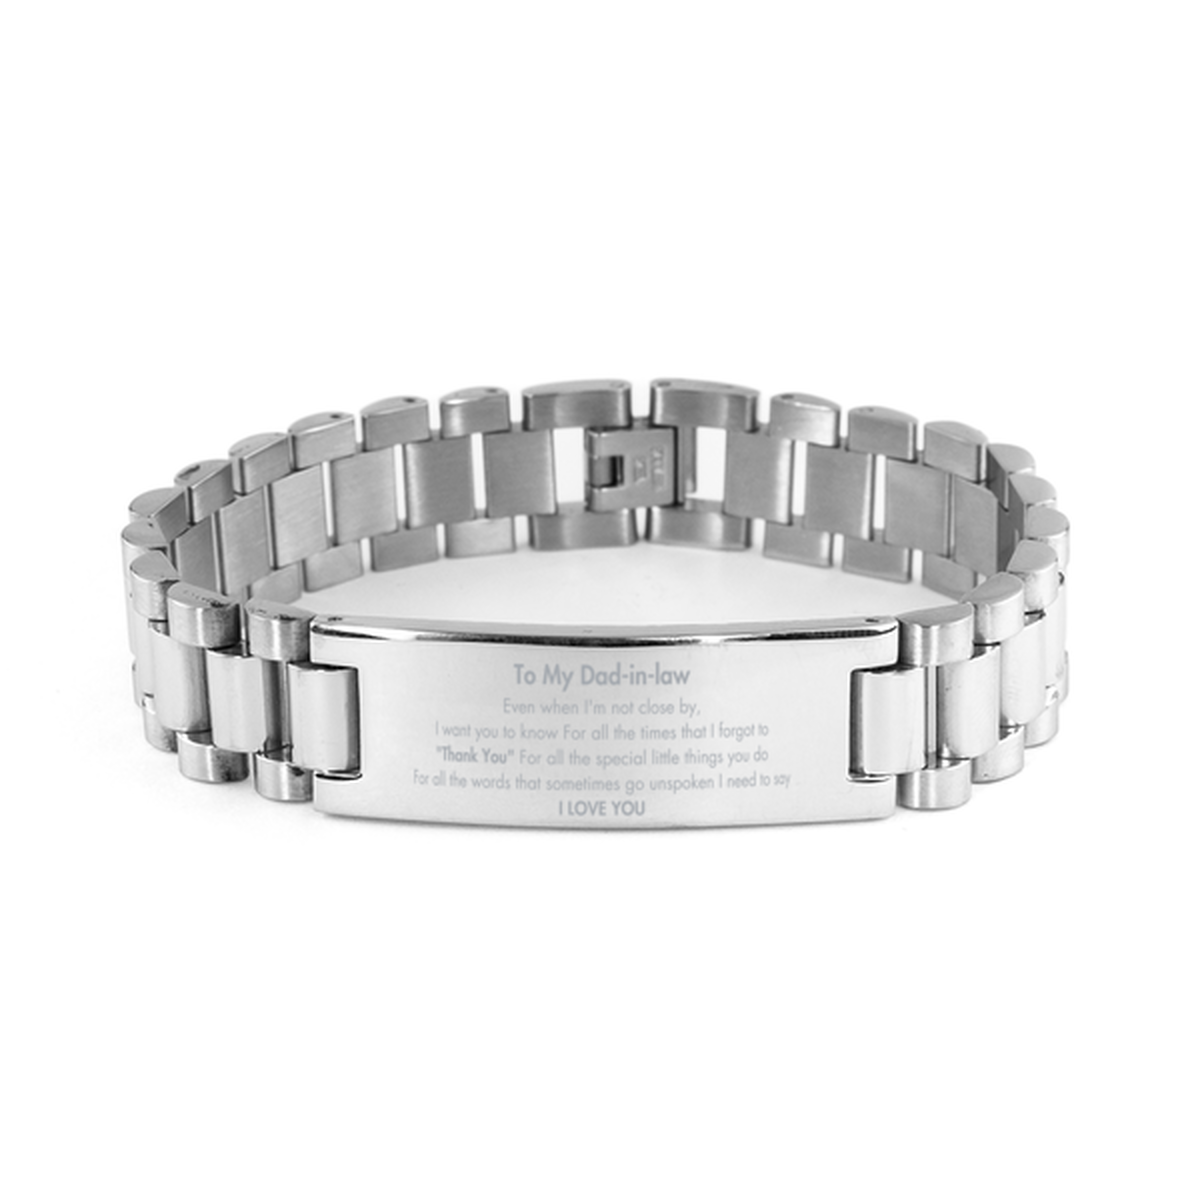 Thank You Gifts for Dad-in-law, Keepsake Ladder Stainless Steel Bracelet Gifts for Dad-in-law Birthday Mother's day Father's Day Dad-in-law For all the words That sometimes go unspoken I need to say I LOVE YOU